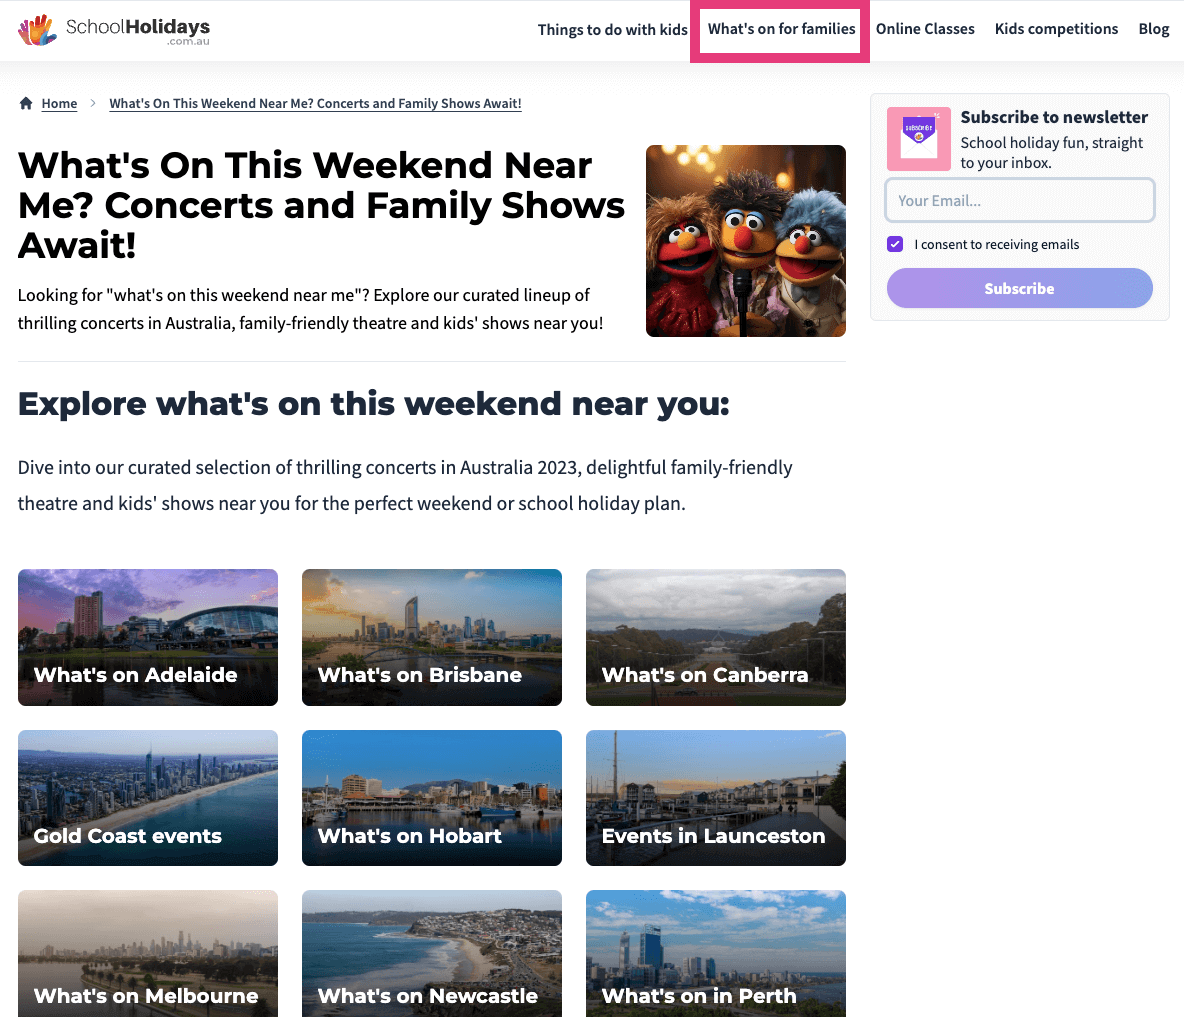 Explore What's On For Families near you (best family-friendly events, kids' shows and concerts in Australia) - schoolholidays.com.au.